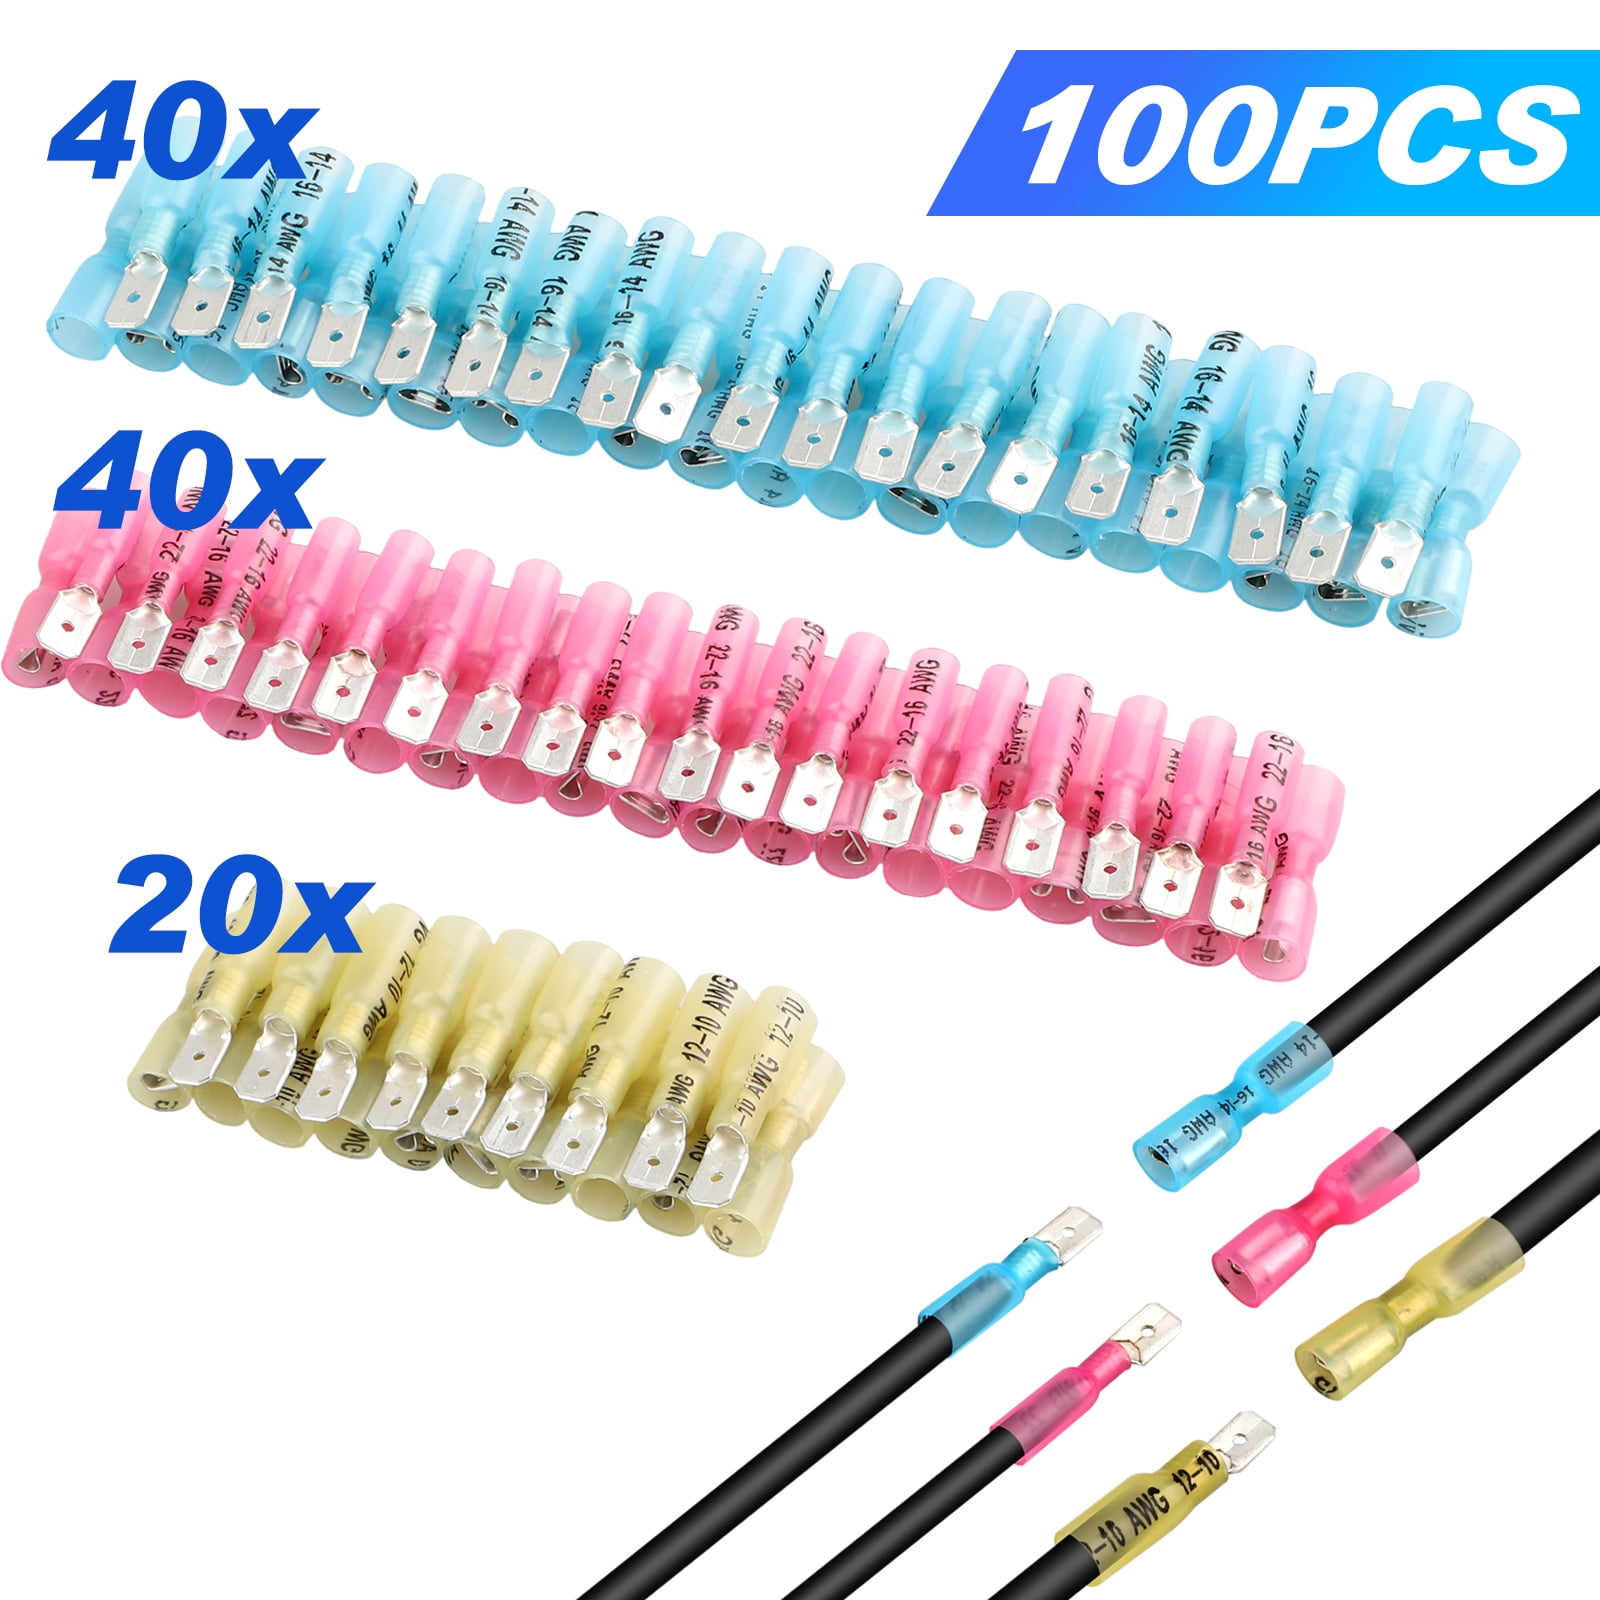 240PCS Propell Automotive Marine Butt Connector Adhesive Ring & Fork Terminal Male & Female Spade Connector Butt Splice Connector Heat Shrink Crimp Terminals Insulated & Waterproof Insulation Sleeve 